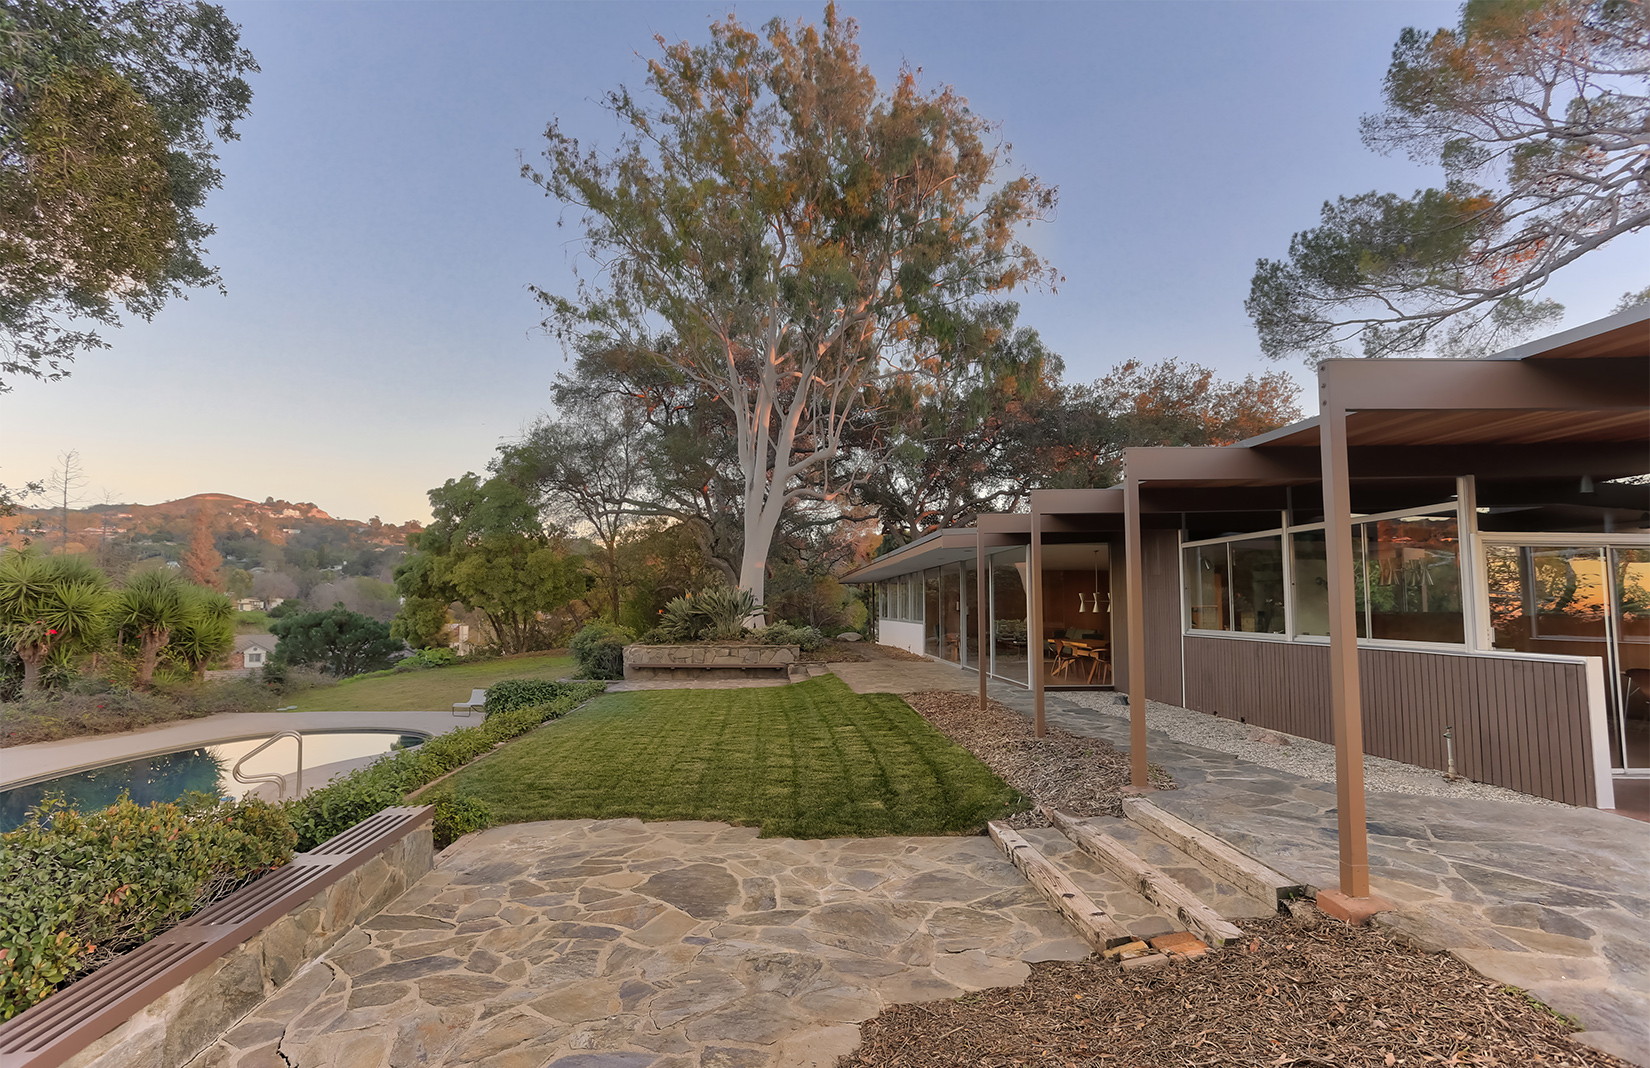 JM Roberts Residence at 621 Wrede Way by Richard Neutra